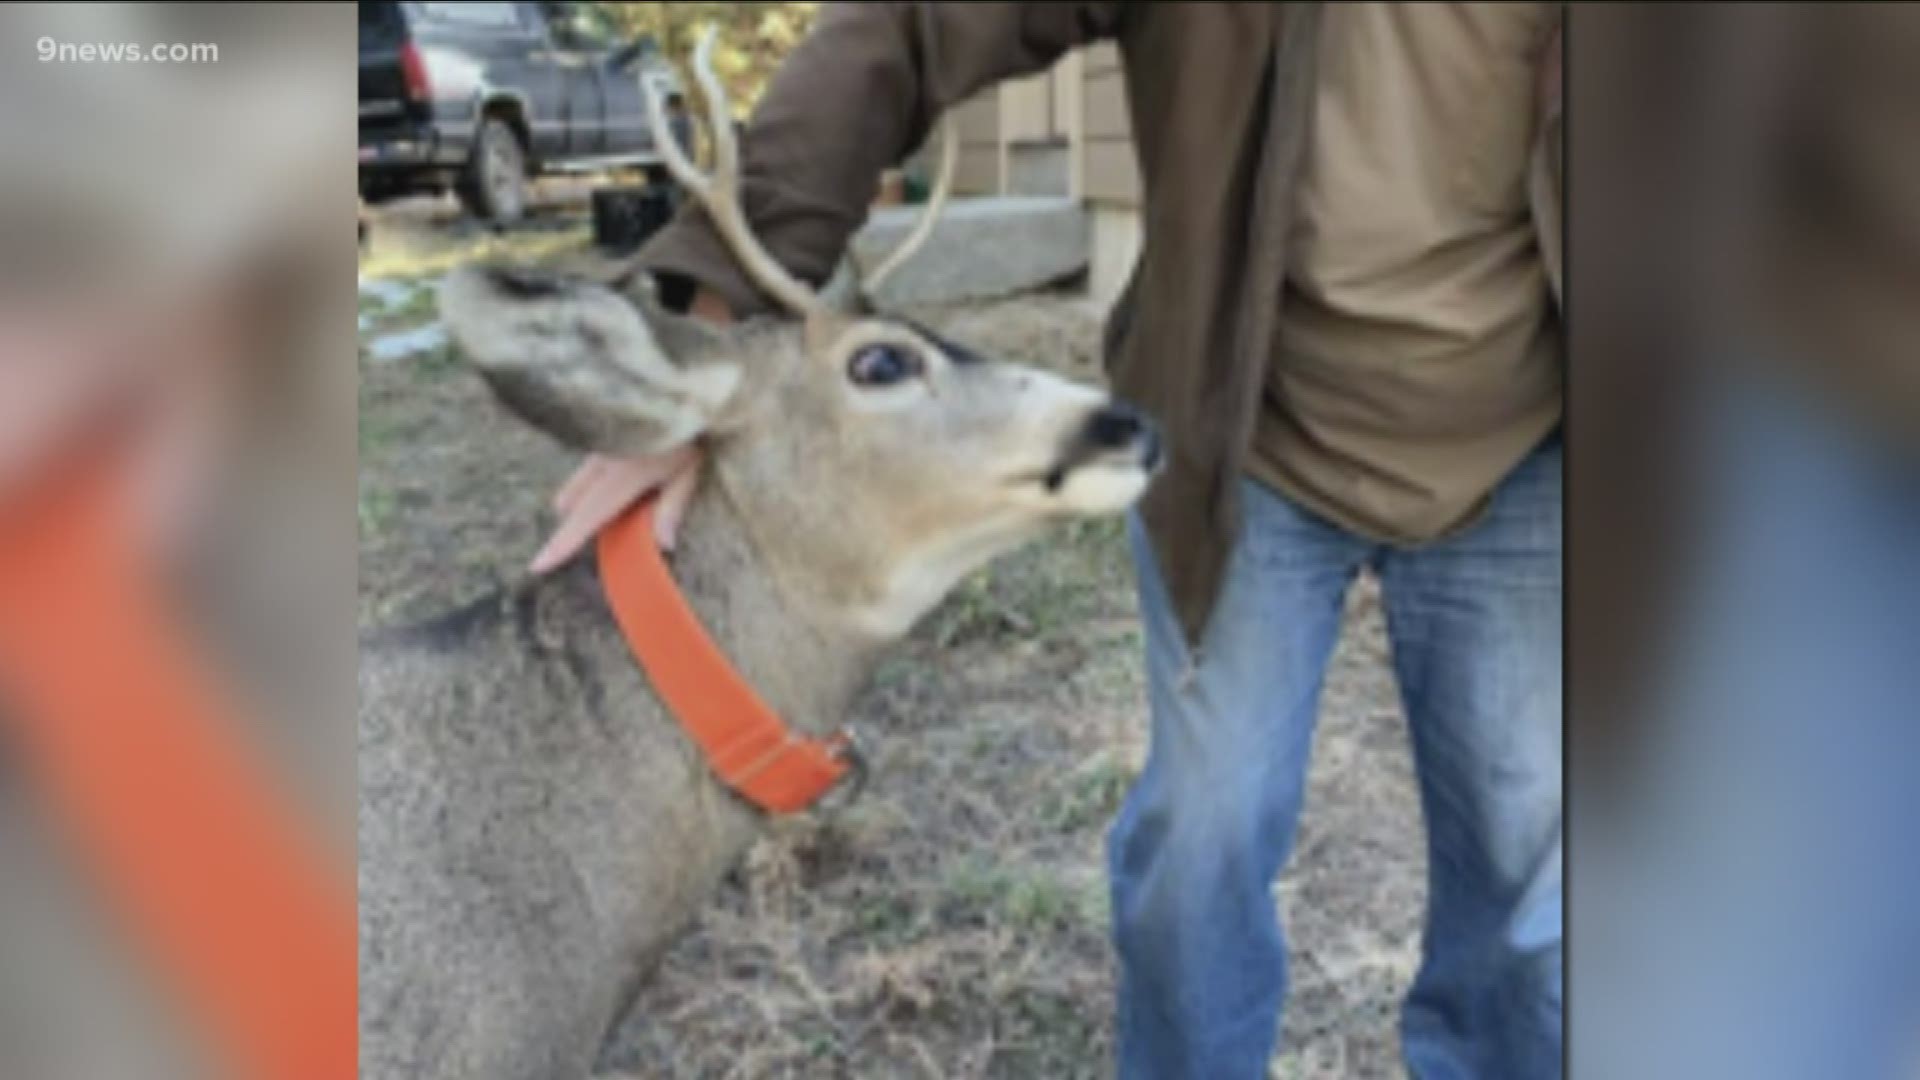 The buck was wearing an orange dog collar. He was put down following the attack.